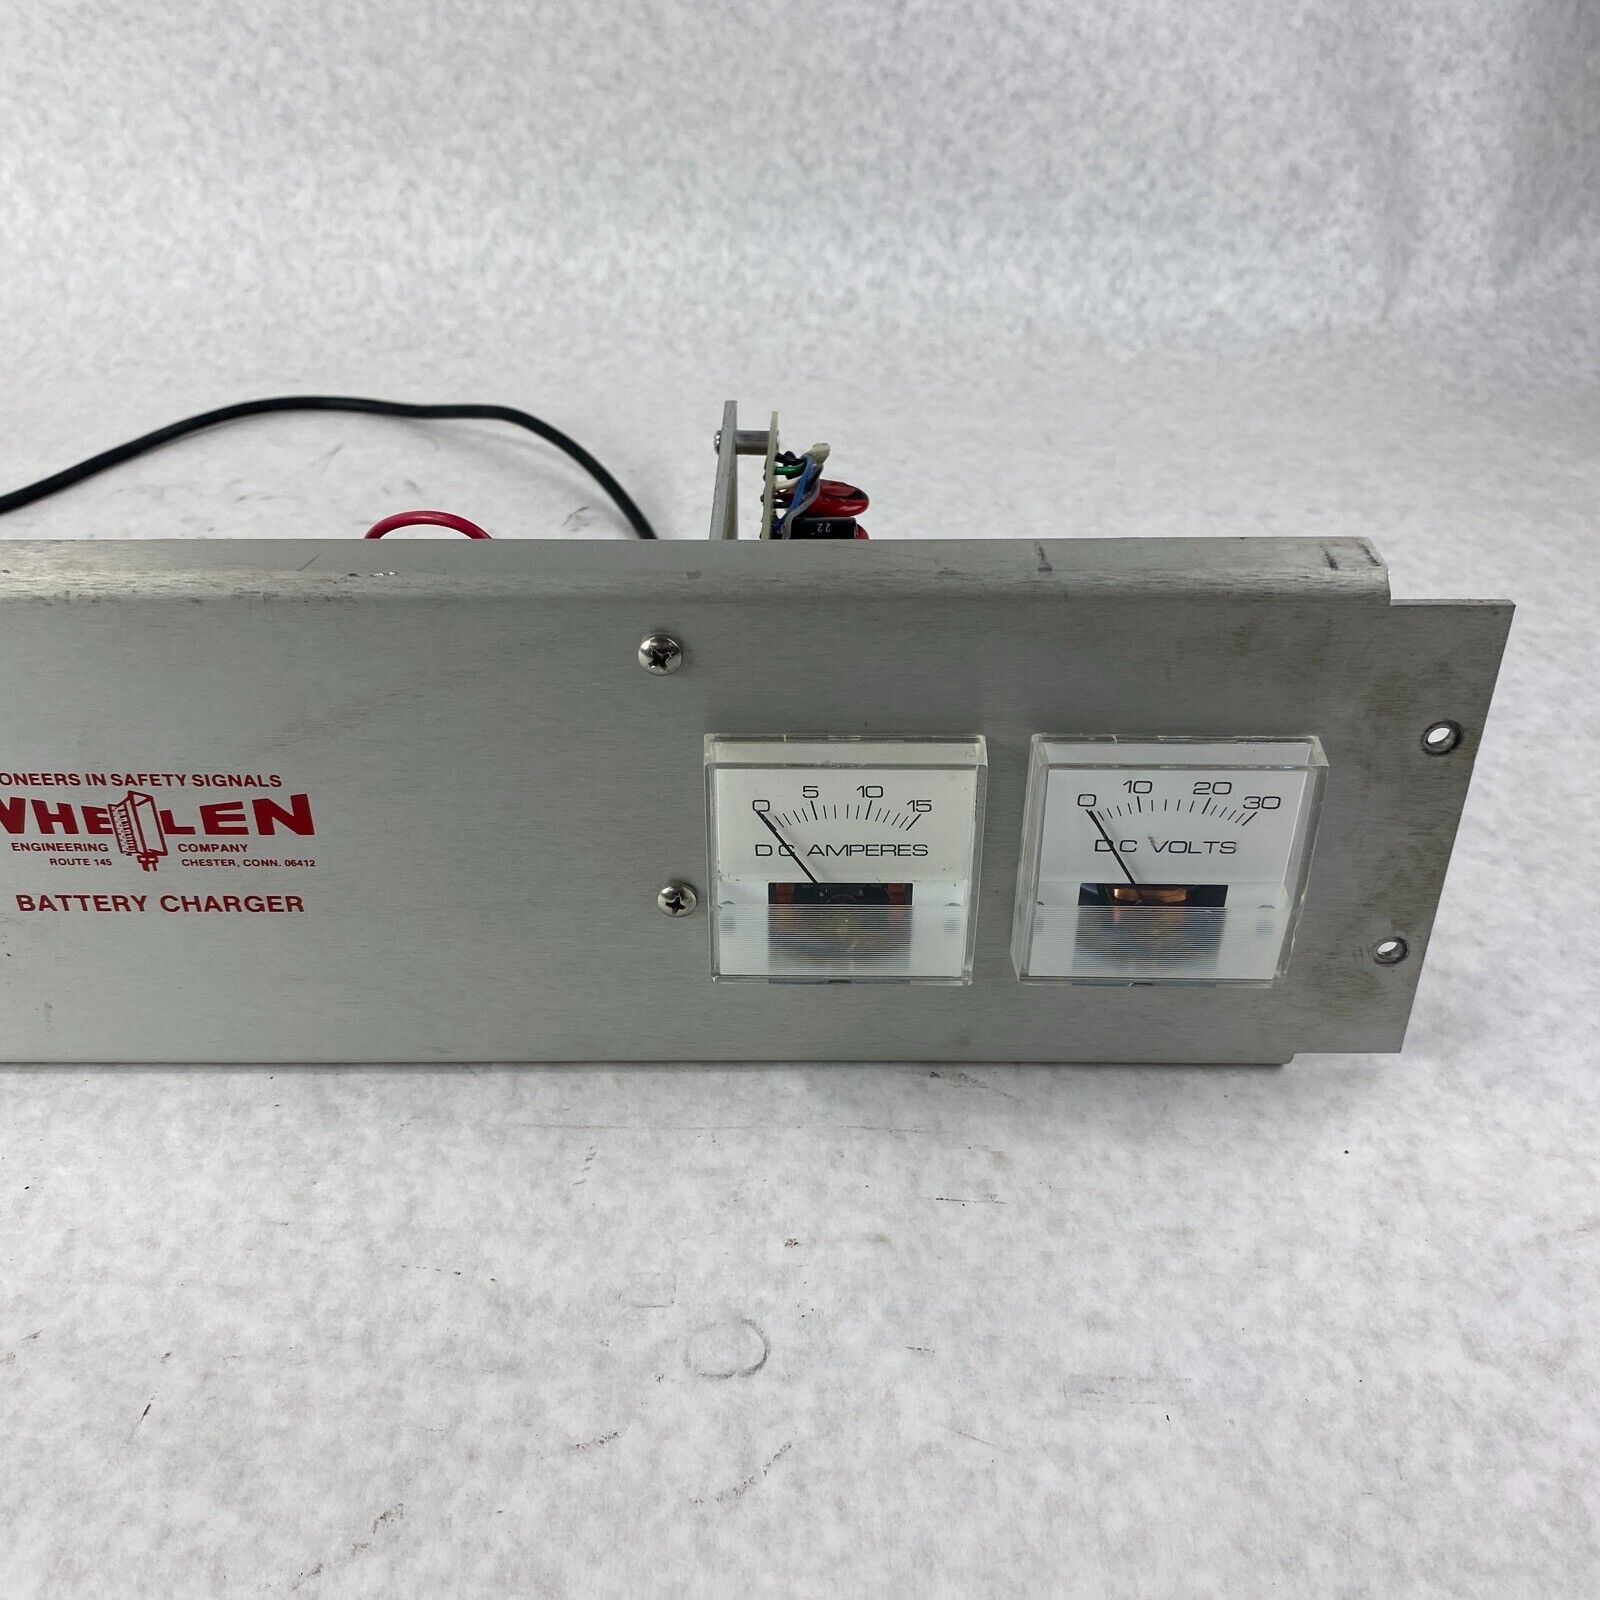 POWER-ONE Power Supply F24-12-A Whelen Battery Charger 01-0280759-ODC